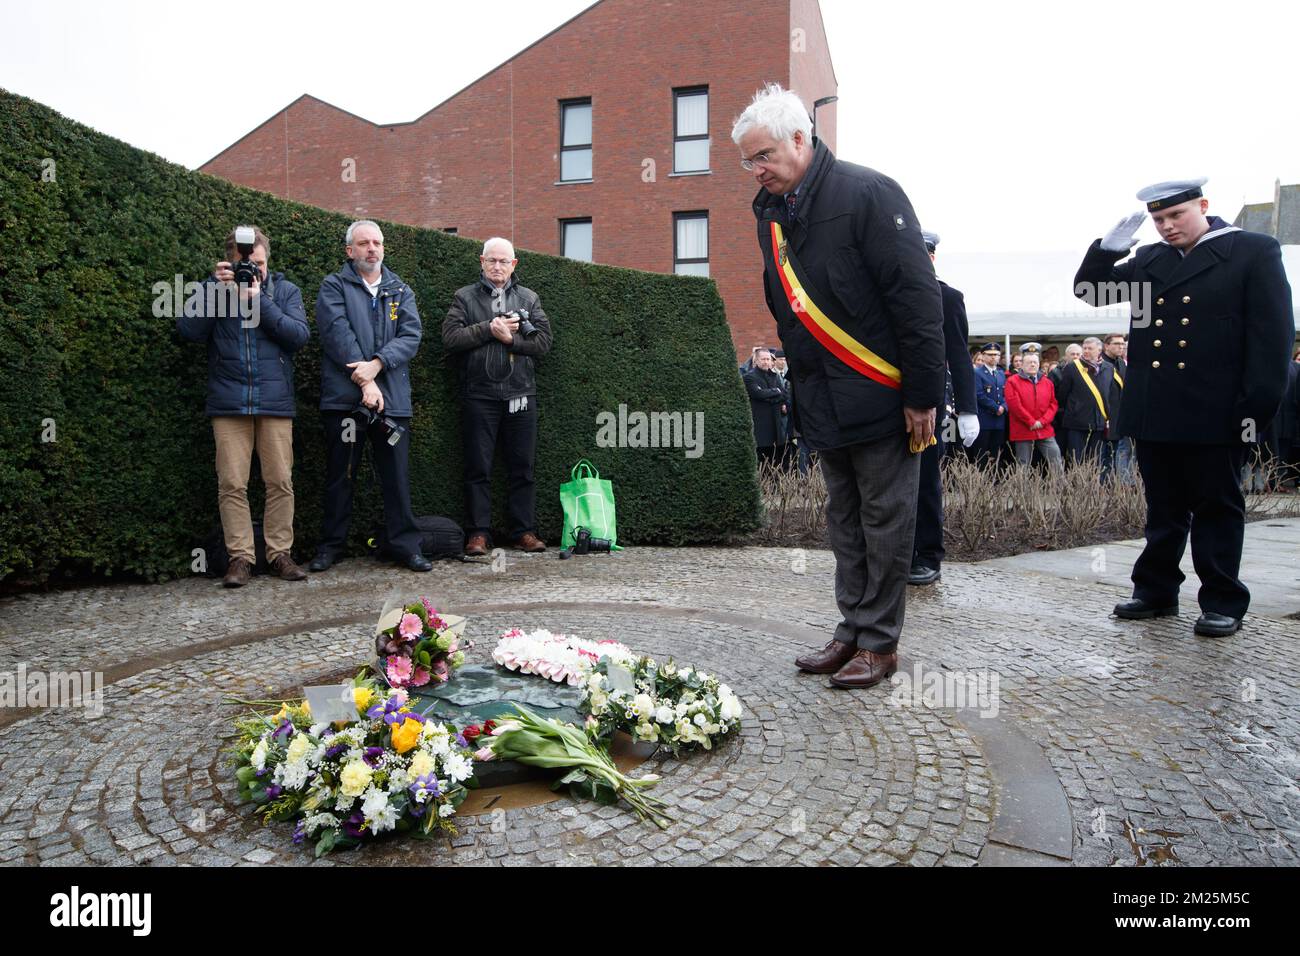 West-Flanders province governor Carl Decaluwe pictured during a tribute ceremony for the 30th anniversary of the Herald of Free Enterprise ferry disaster, on Monday 06 March 2017 in Zeebrugge. On 6 March 1987 the ferry left the harbor of Zeebrugge, bound for Dover with more than 450 passengers and 80 crew members on board. It capsized just outside the harbor. The disaster, which was caused by the failure to close the bow doors, cost the life of 194 people. BELGA PHOTO KURT DESPLENTER Stock Photo